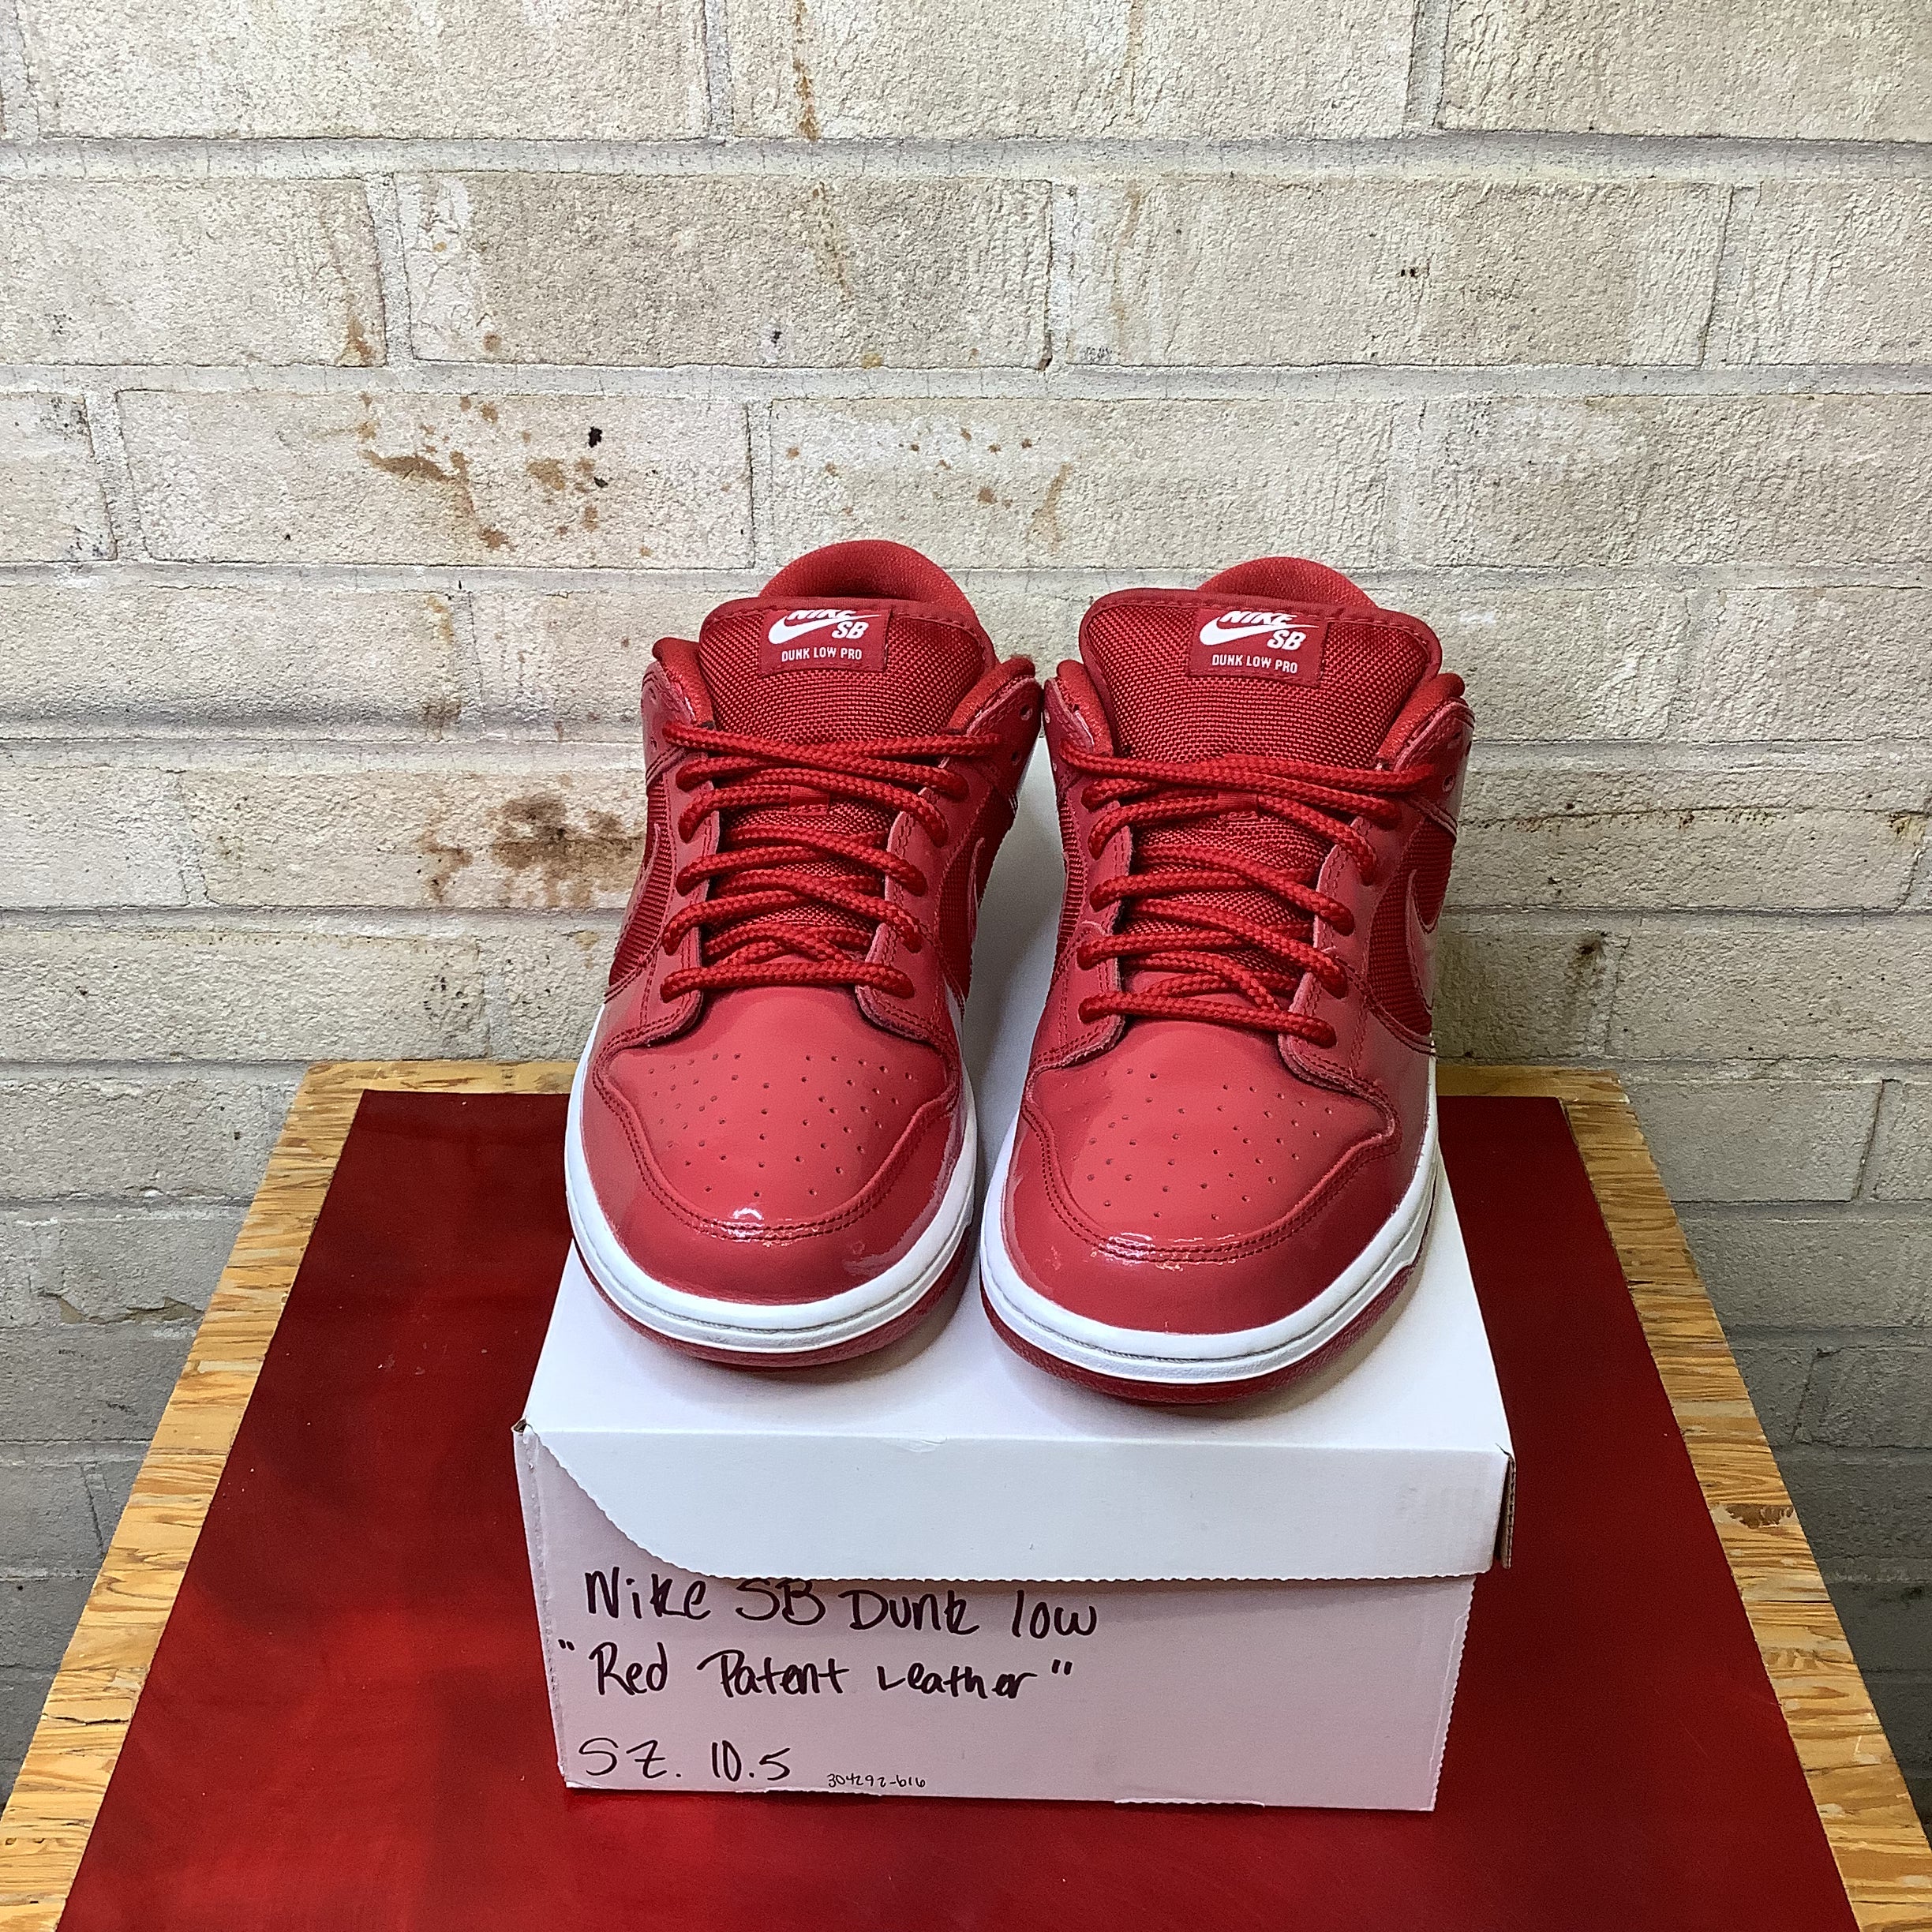 NIKE SB DUNK LOW RED PATENT LEATHER SIZE 10.5 304292-616